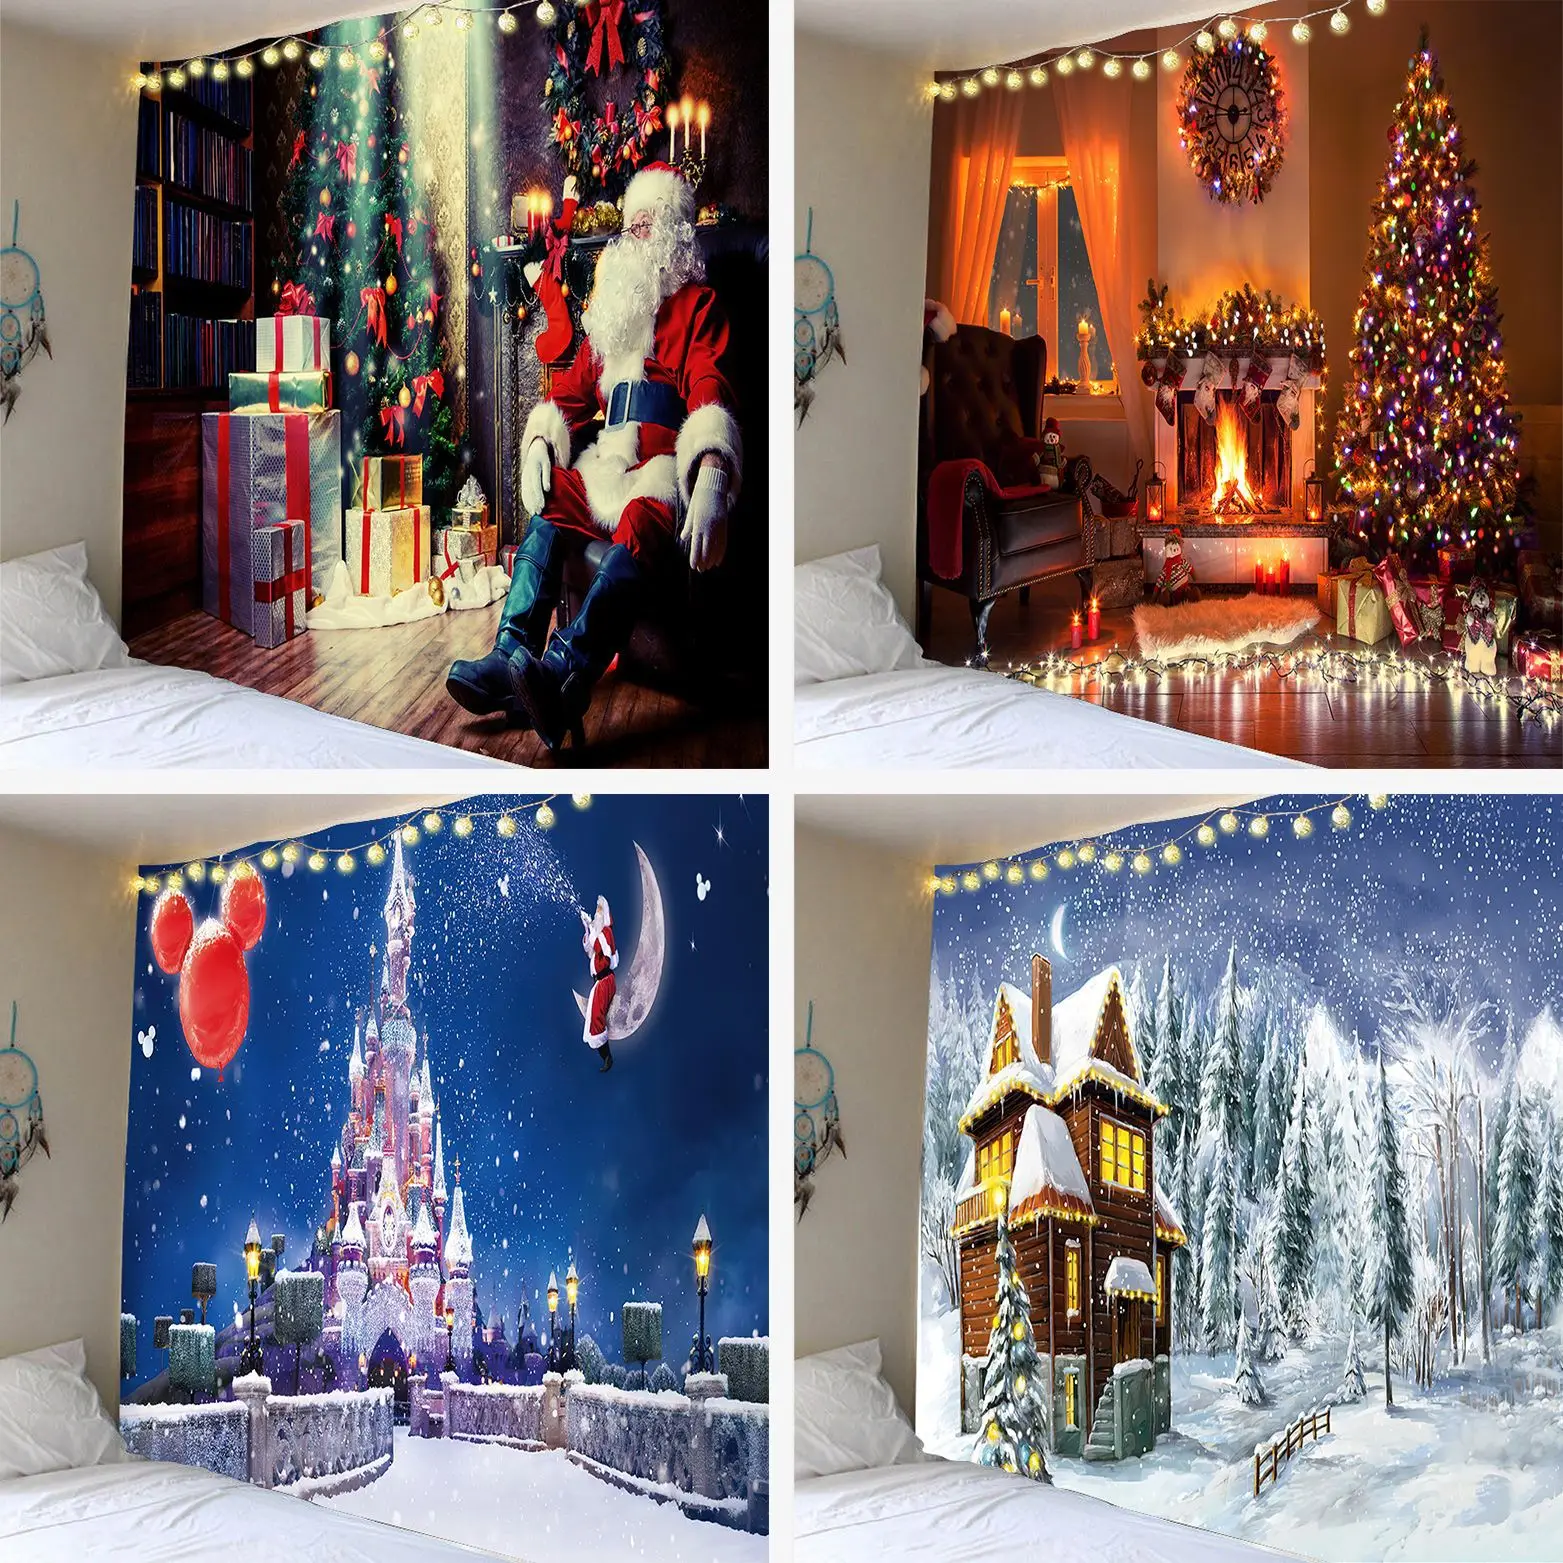 

Christmas Tapestry Santa Claus Snowman New Year Background Wall Hanging Decoration Fireplace Stockings Gifts Hanging Cloth